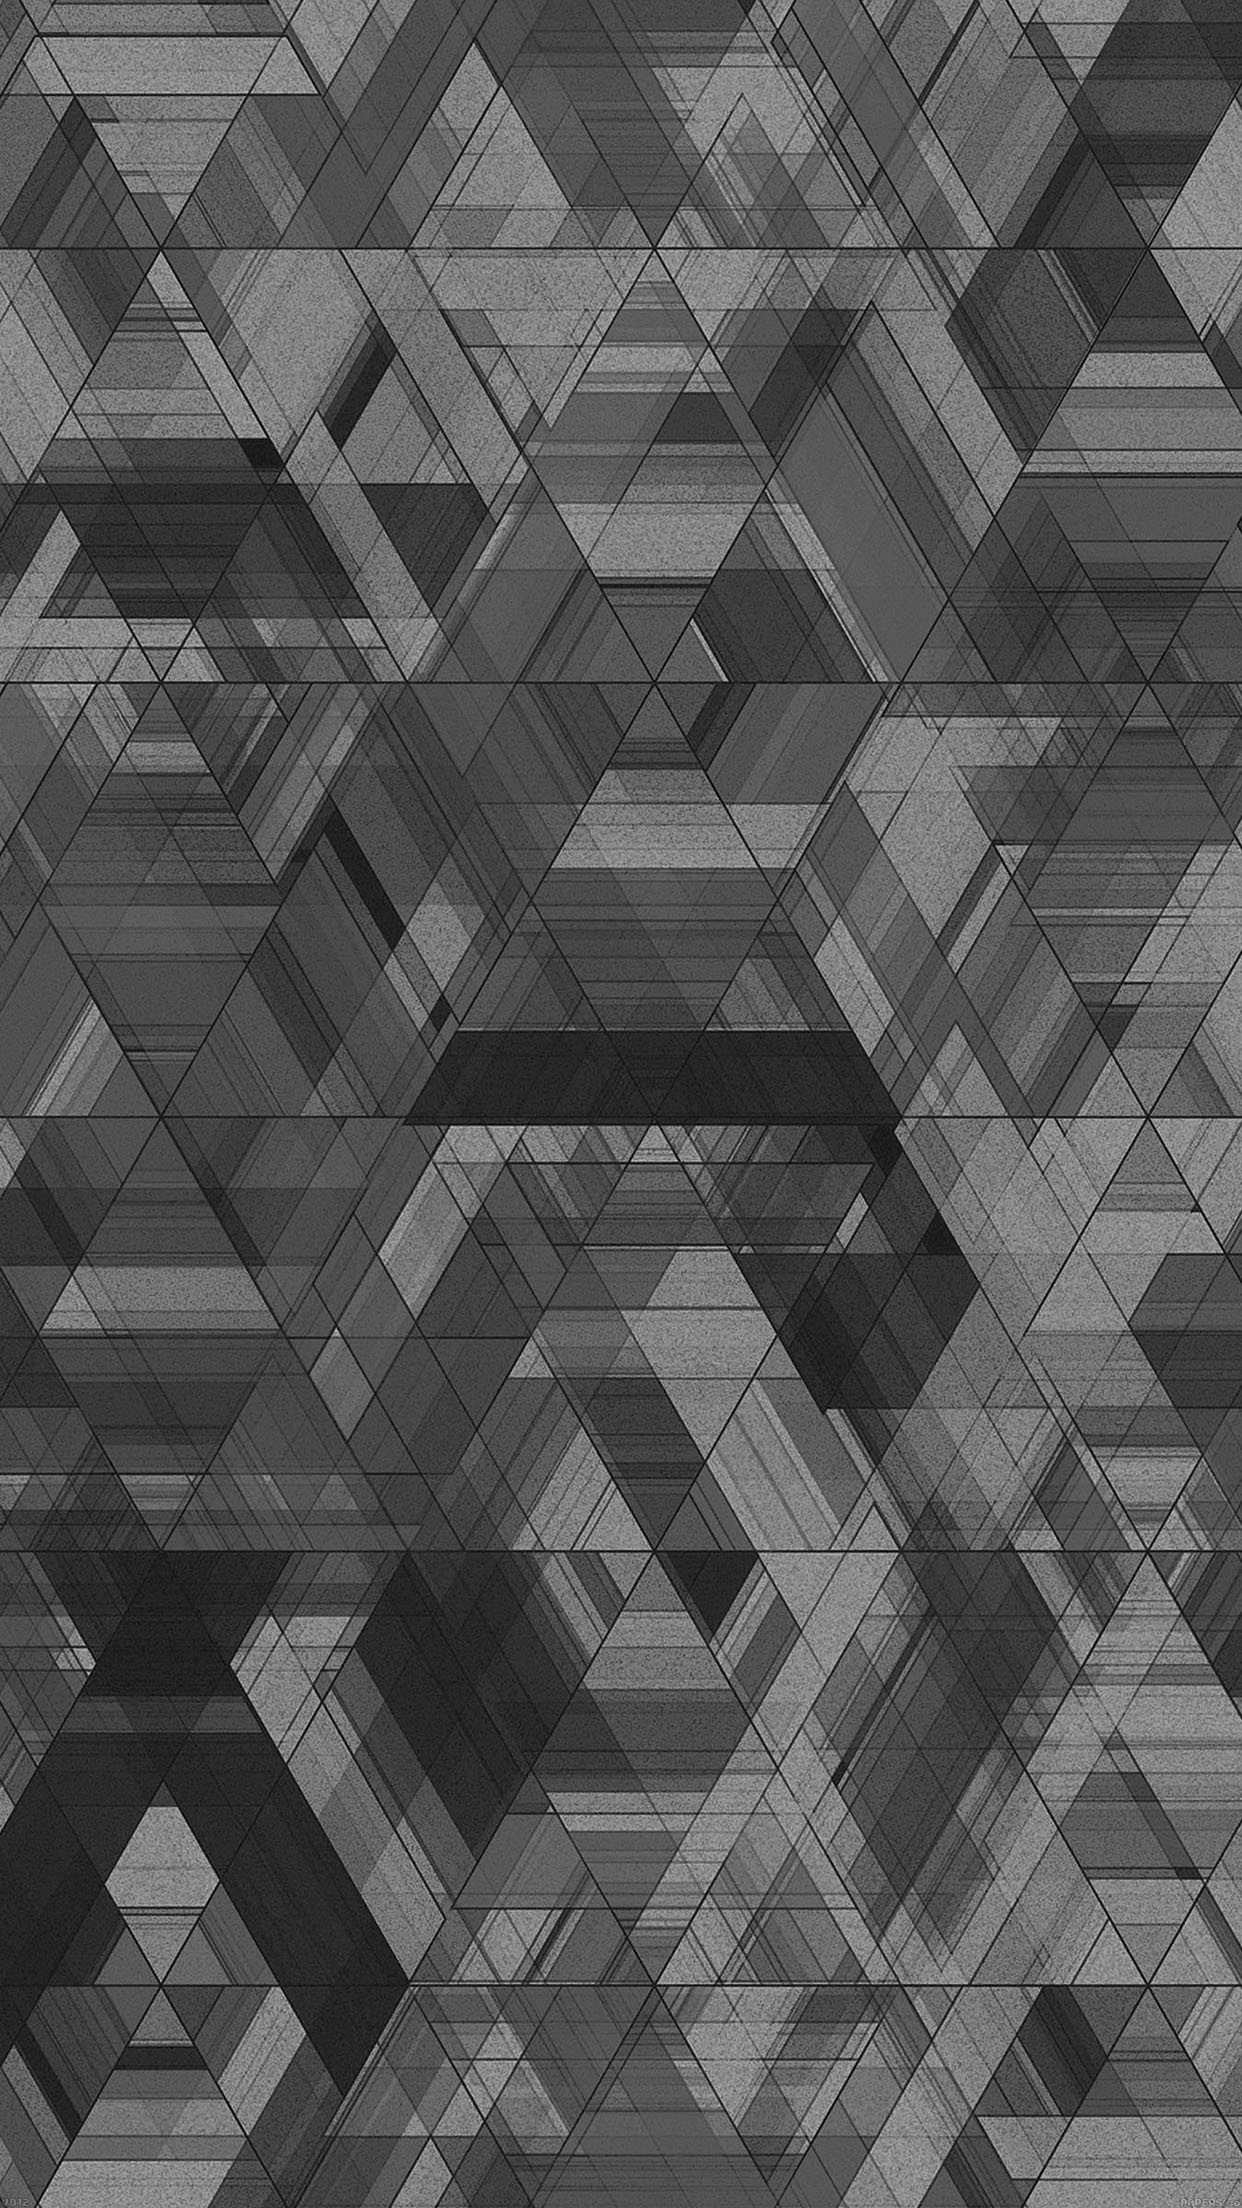 space-black-abstract-cimon-cpage-pattern-art-34-iphone-7-plus-wallpaper